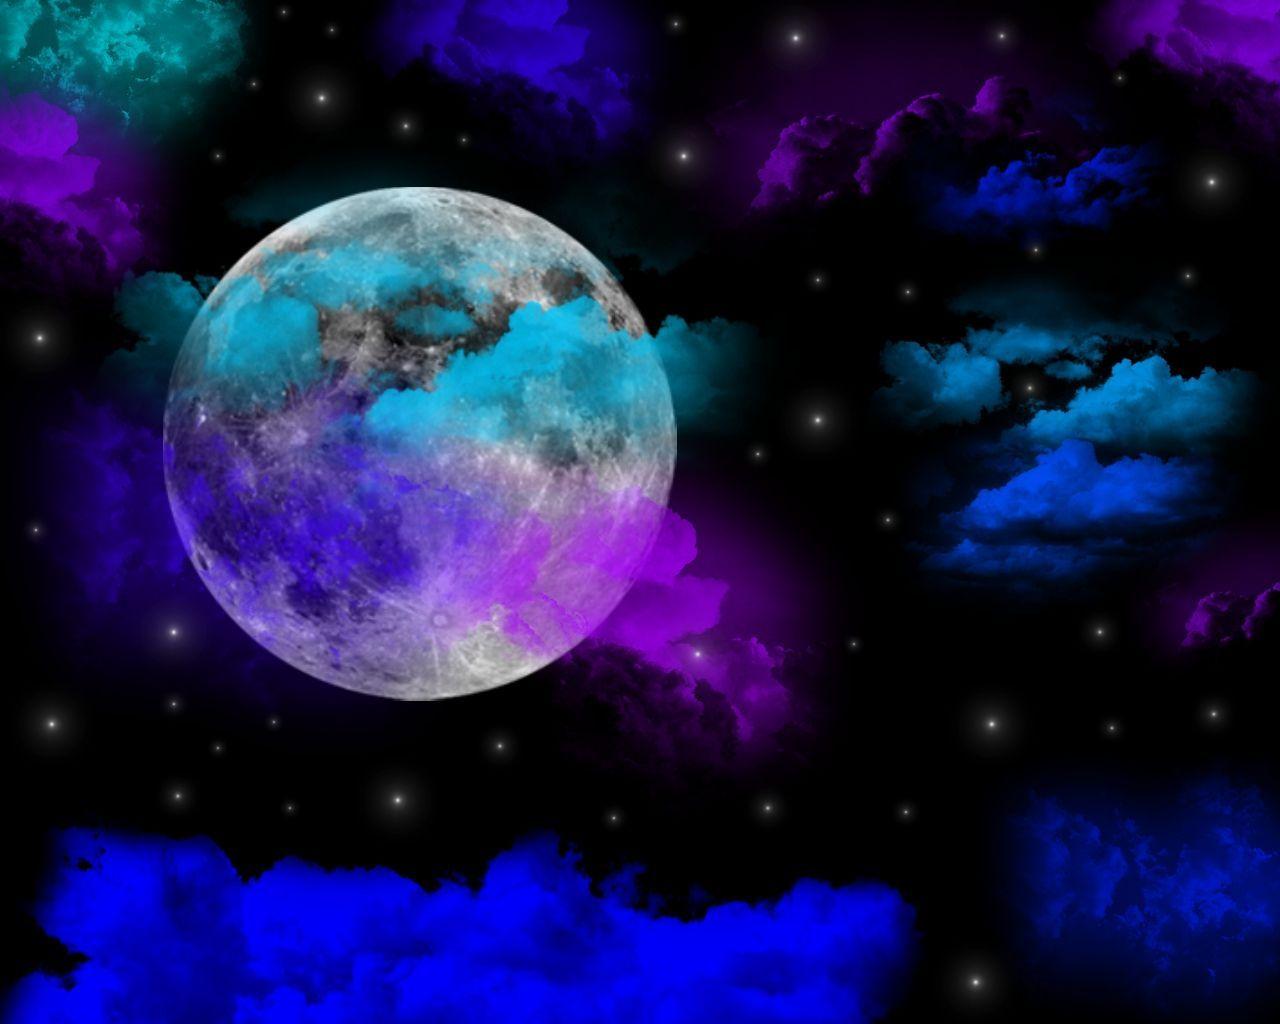 Magical Night Sky Wallpapers - Top Free Magical Night Sky Backgrounds